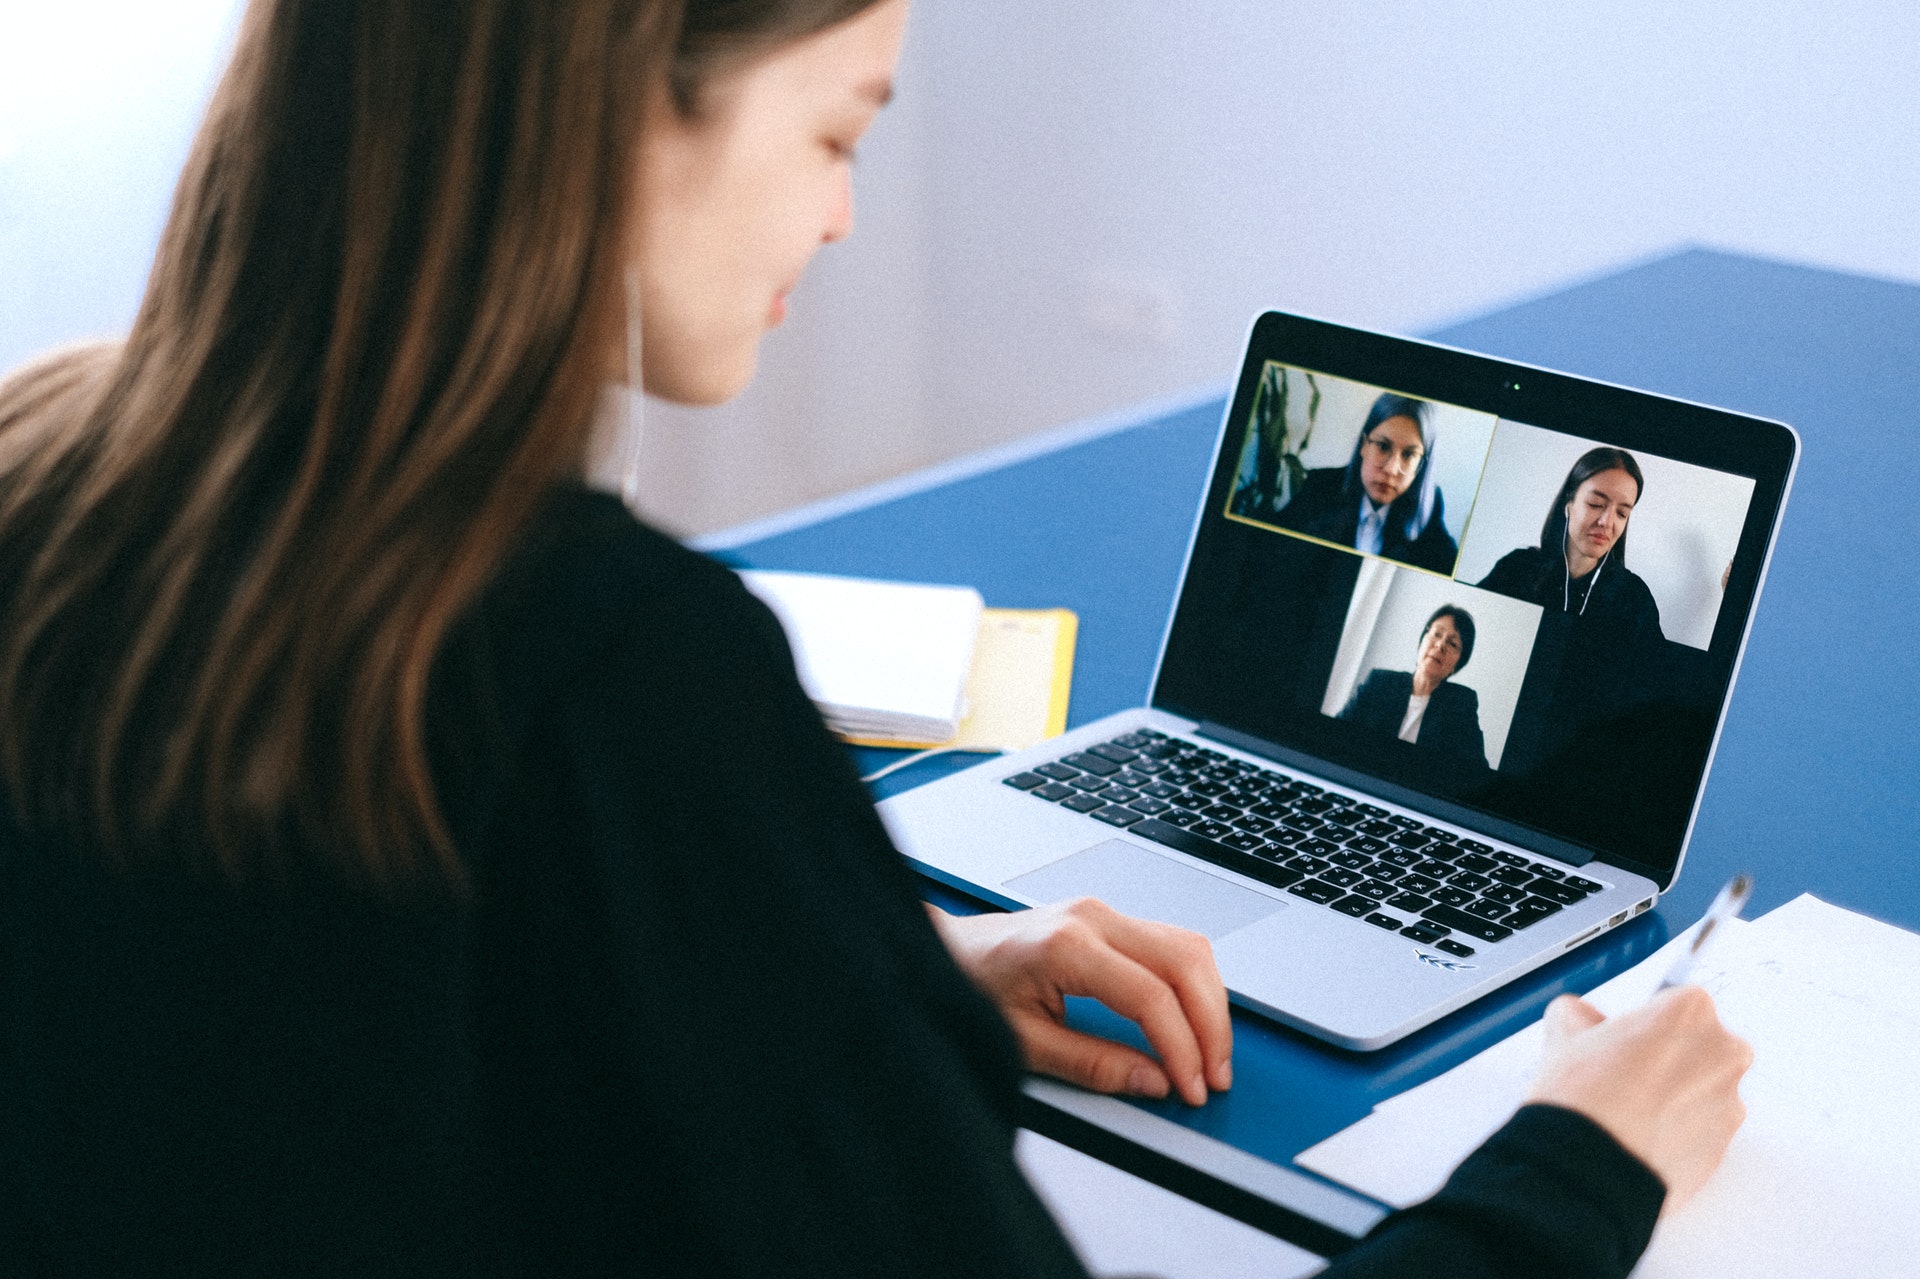 A woman on a video call with three other women